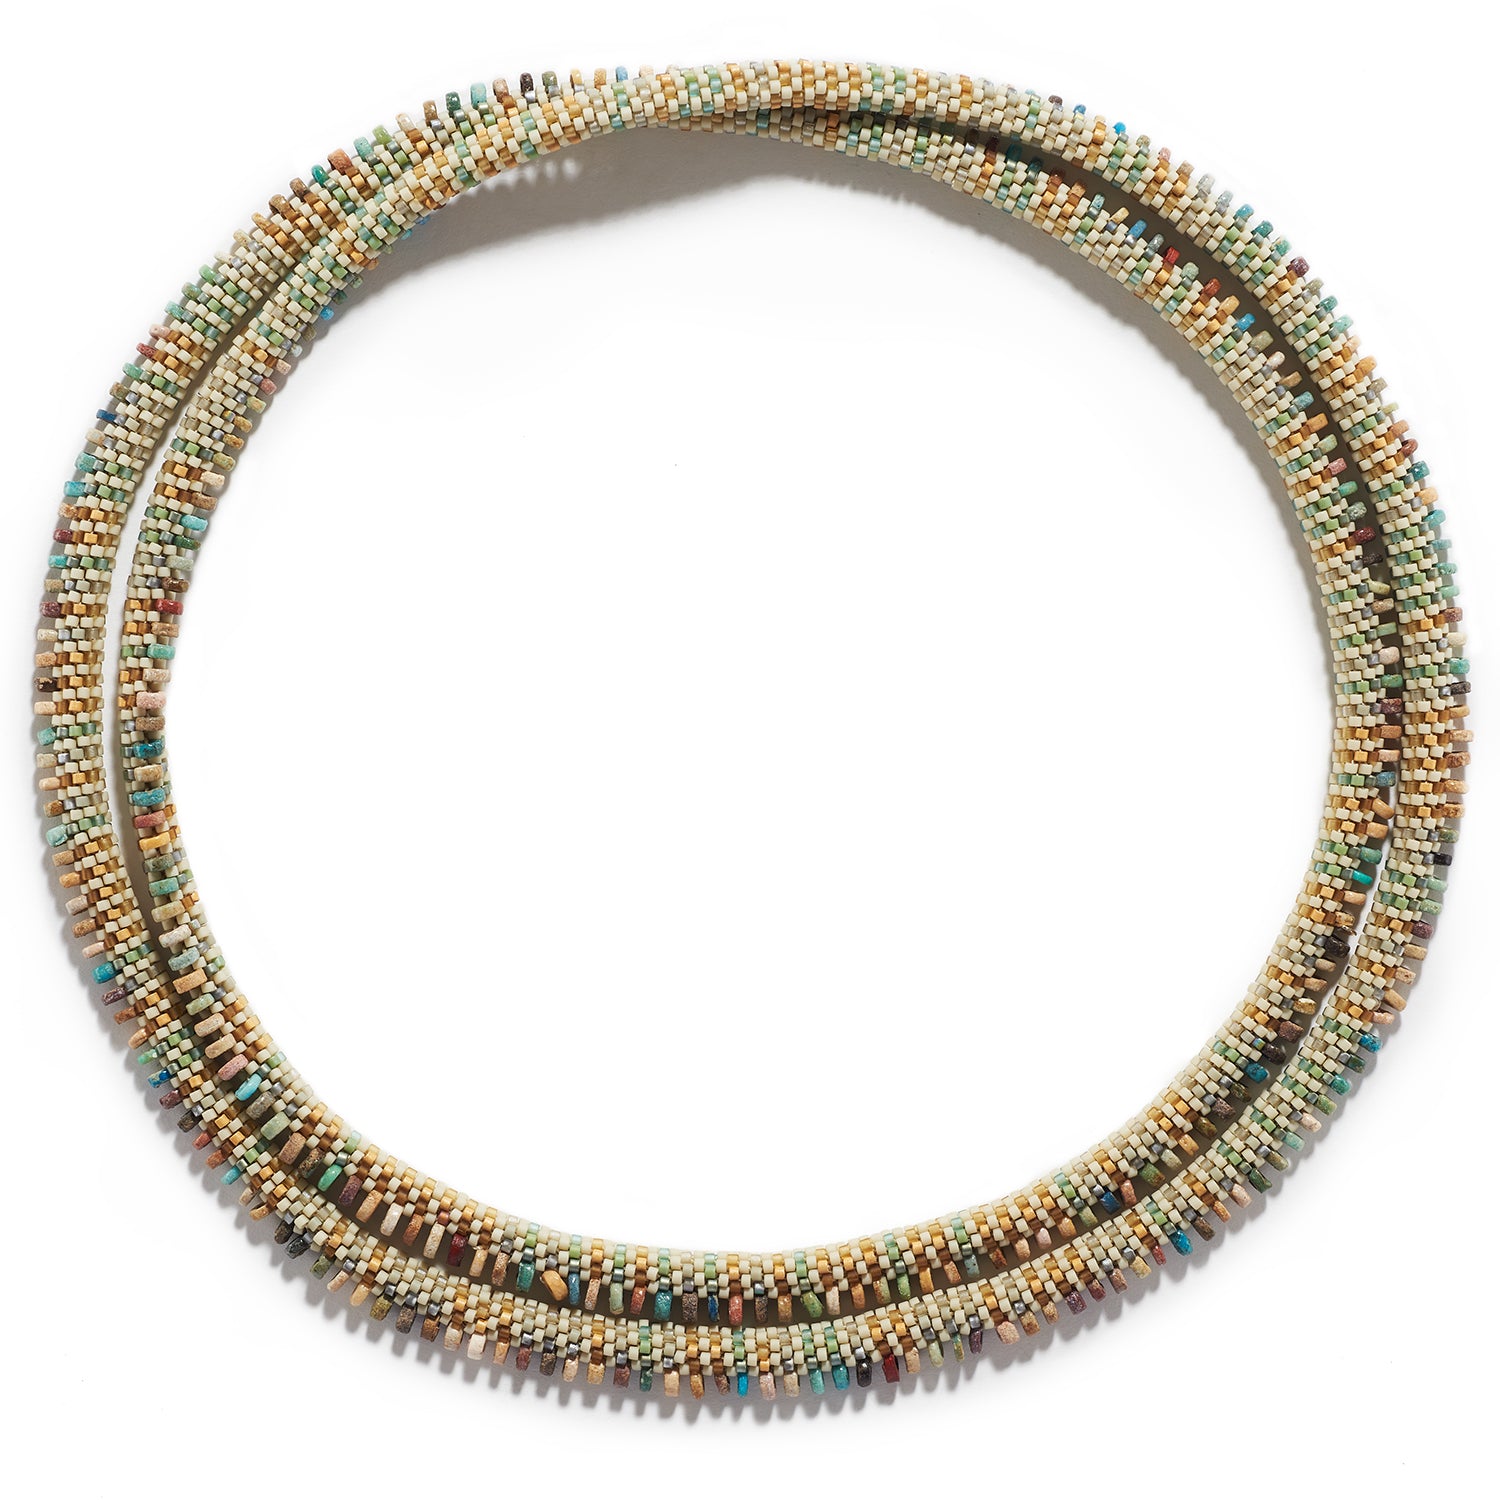 Faience I Necklace